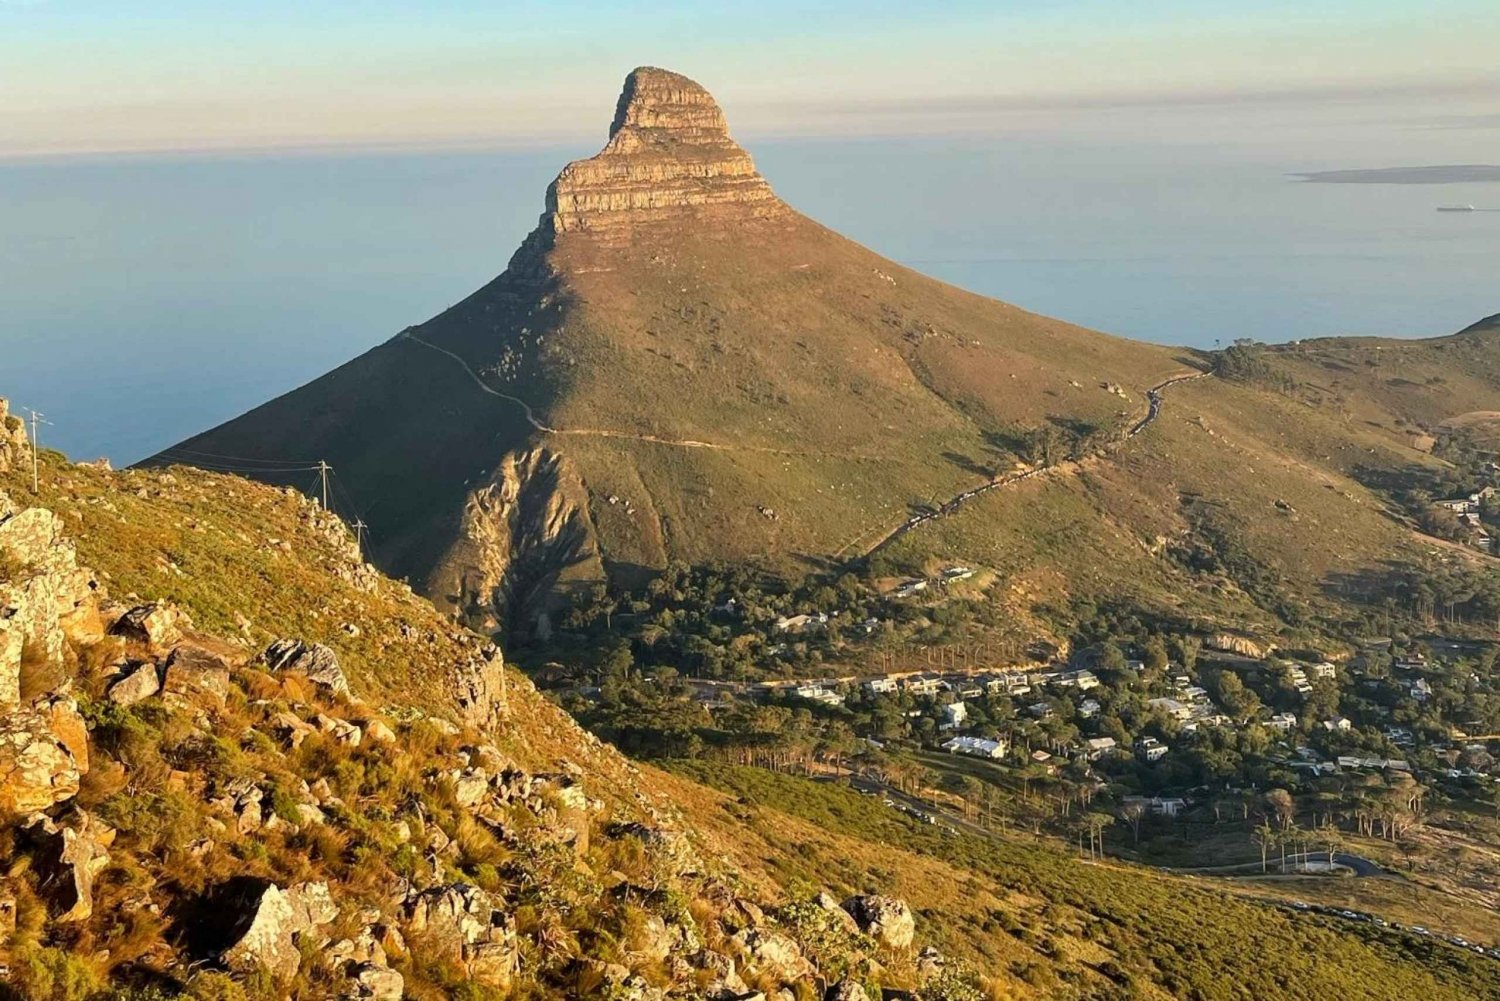 Sunset or Sunrise Hike on Lions Head, Cape Town